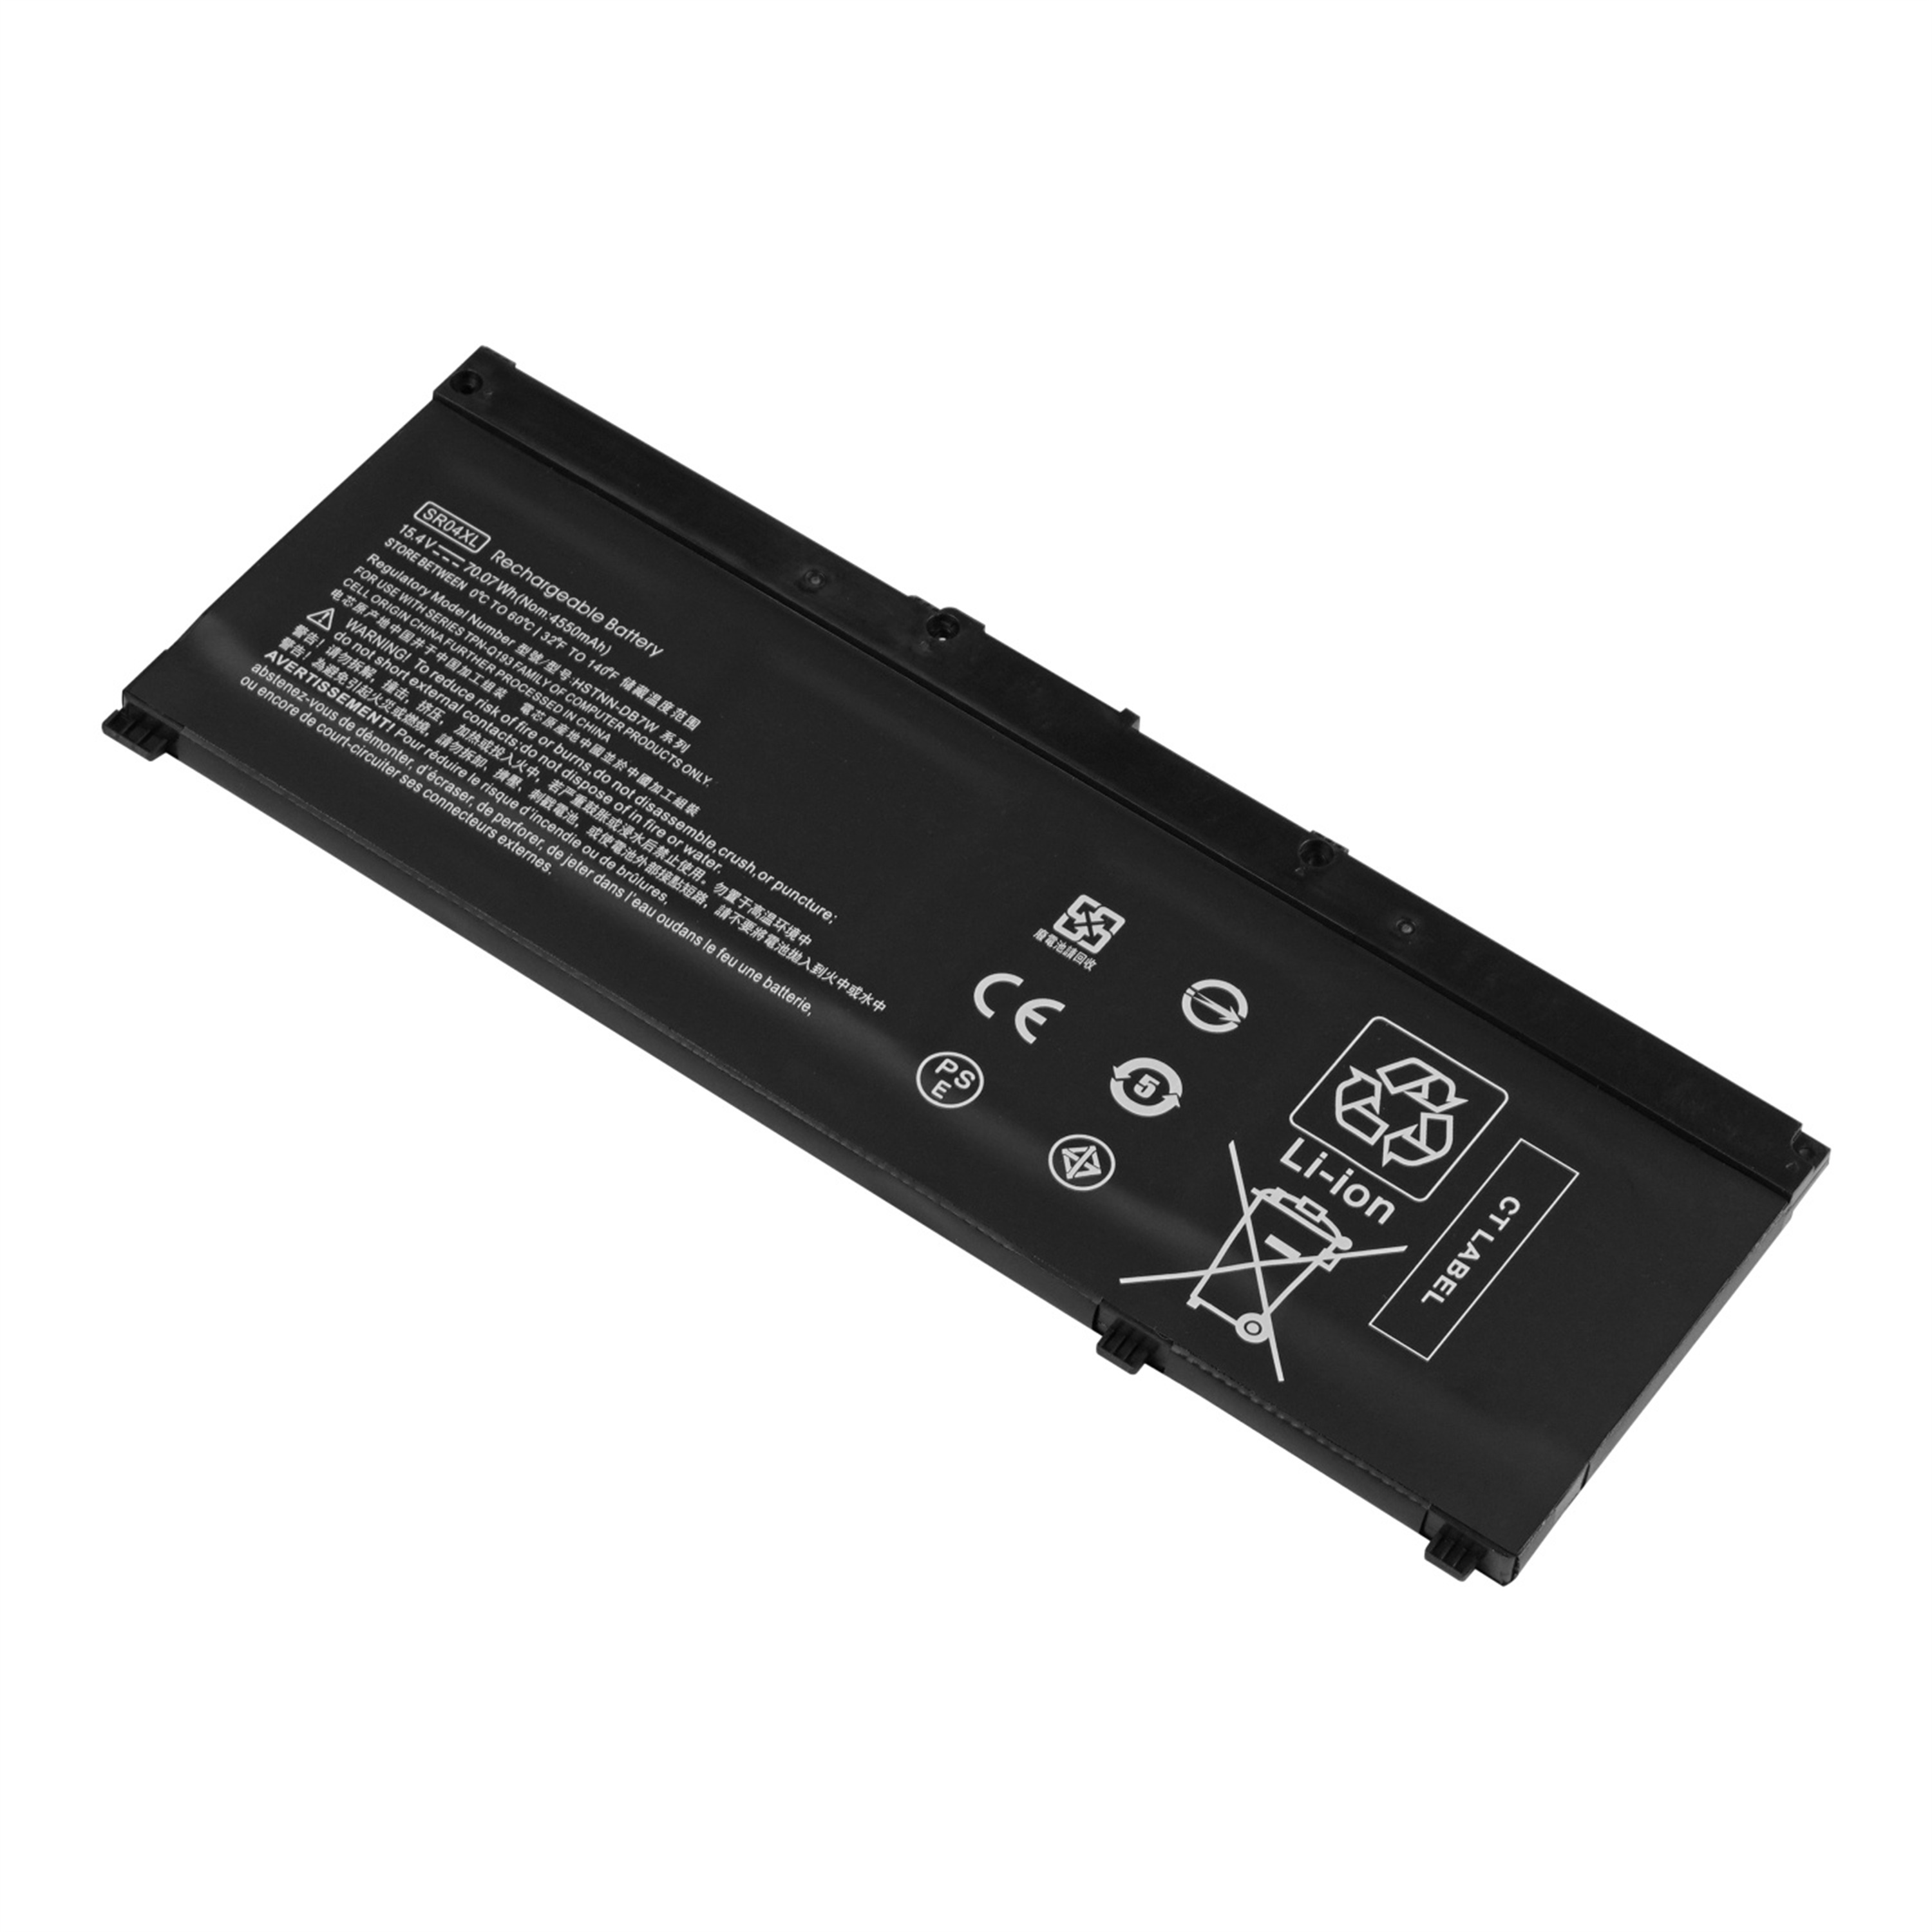 SR04XL rechargeable lithium ion Notebook battery Laptop battery For HP 15-CE000 Series HSTNN-IB7Z 15.4V 70.07Wh 4550mAh 4cell